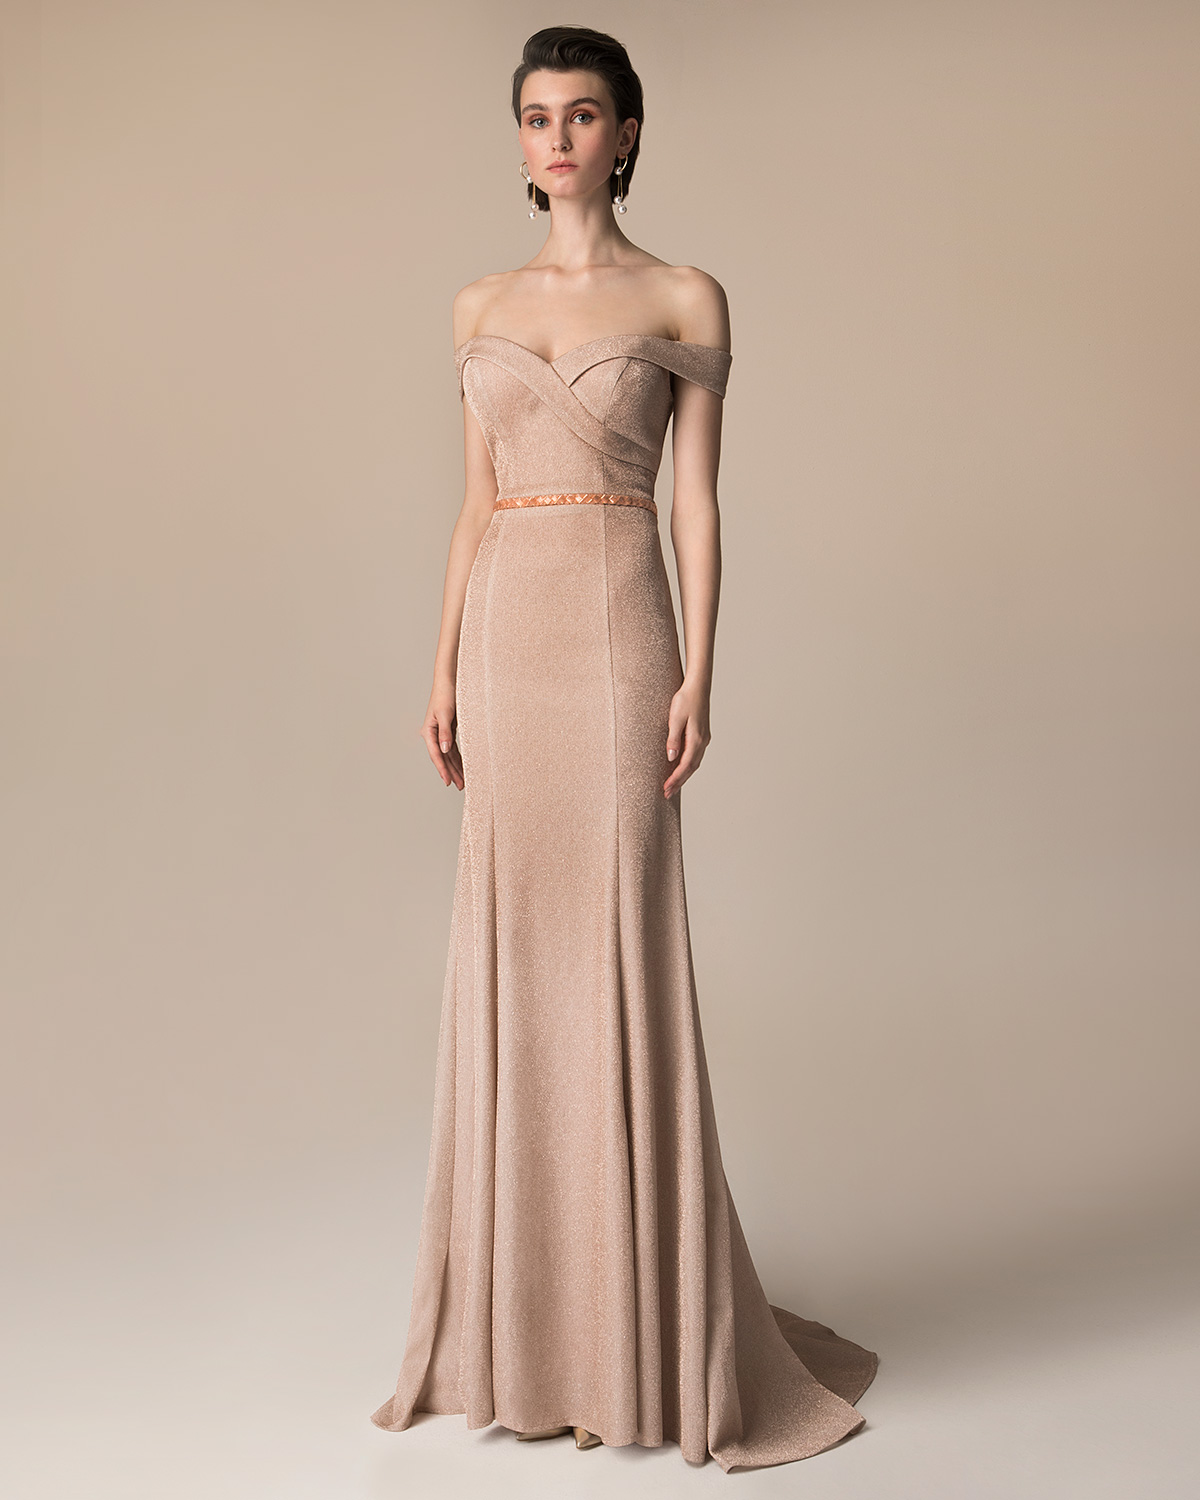 Evening Dresses / Long evening dress with beaded belt and shining fabric